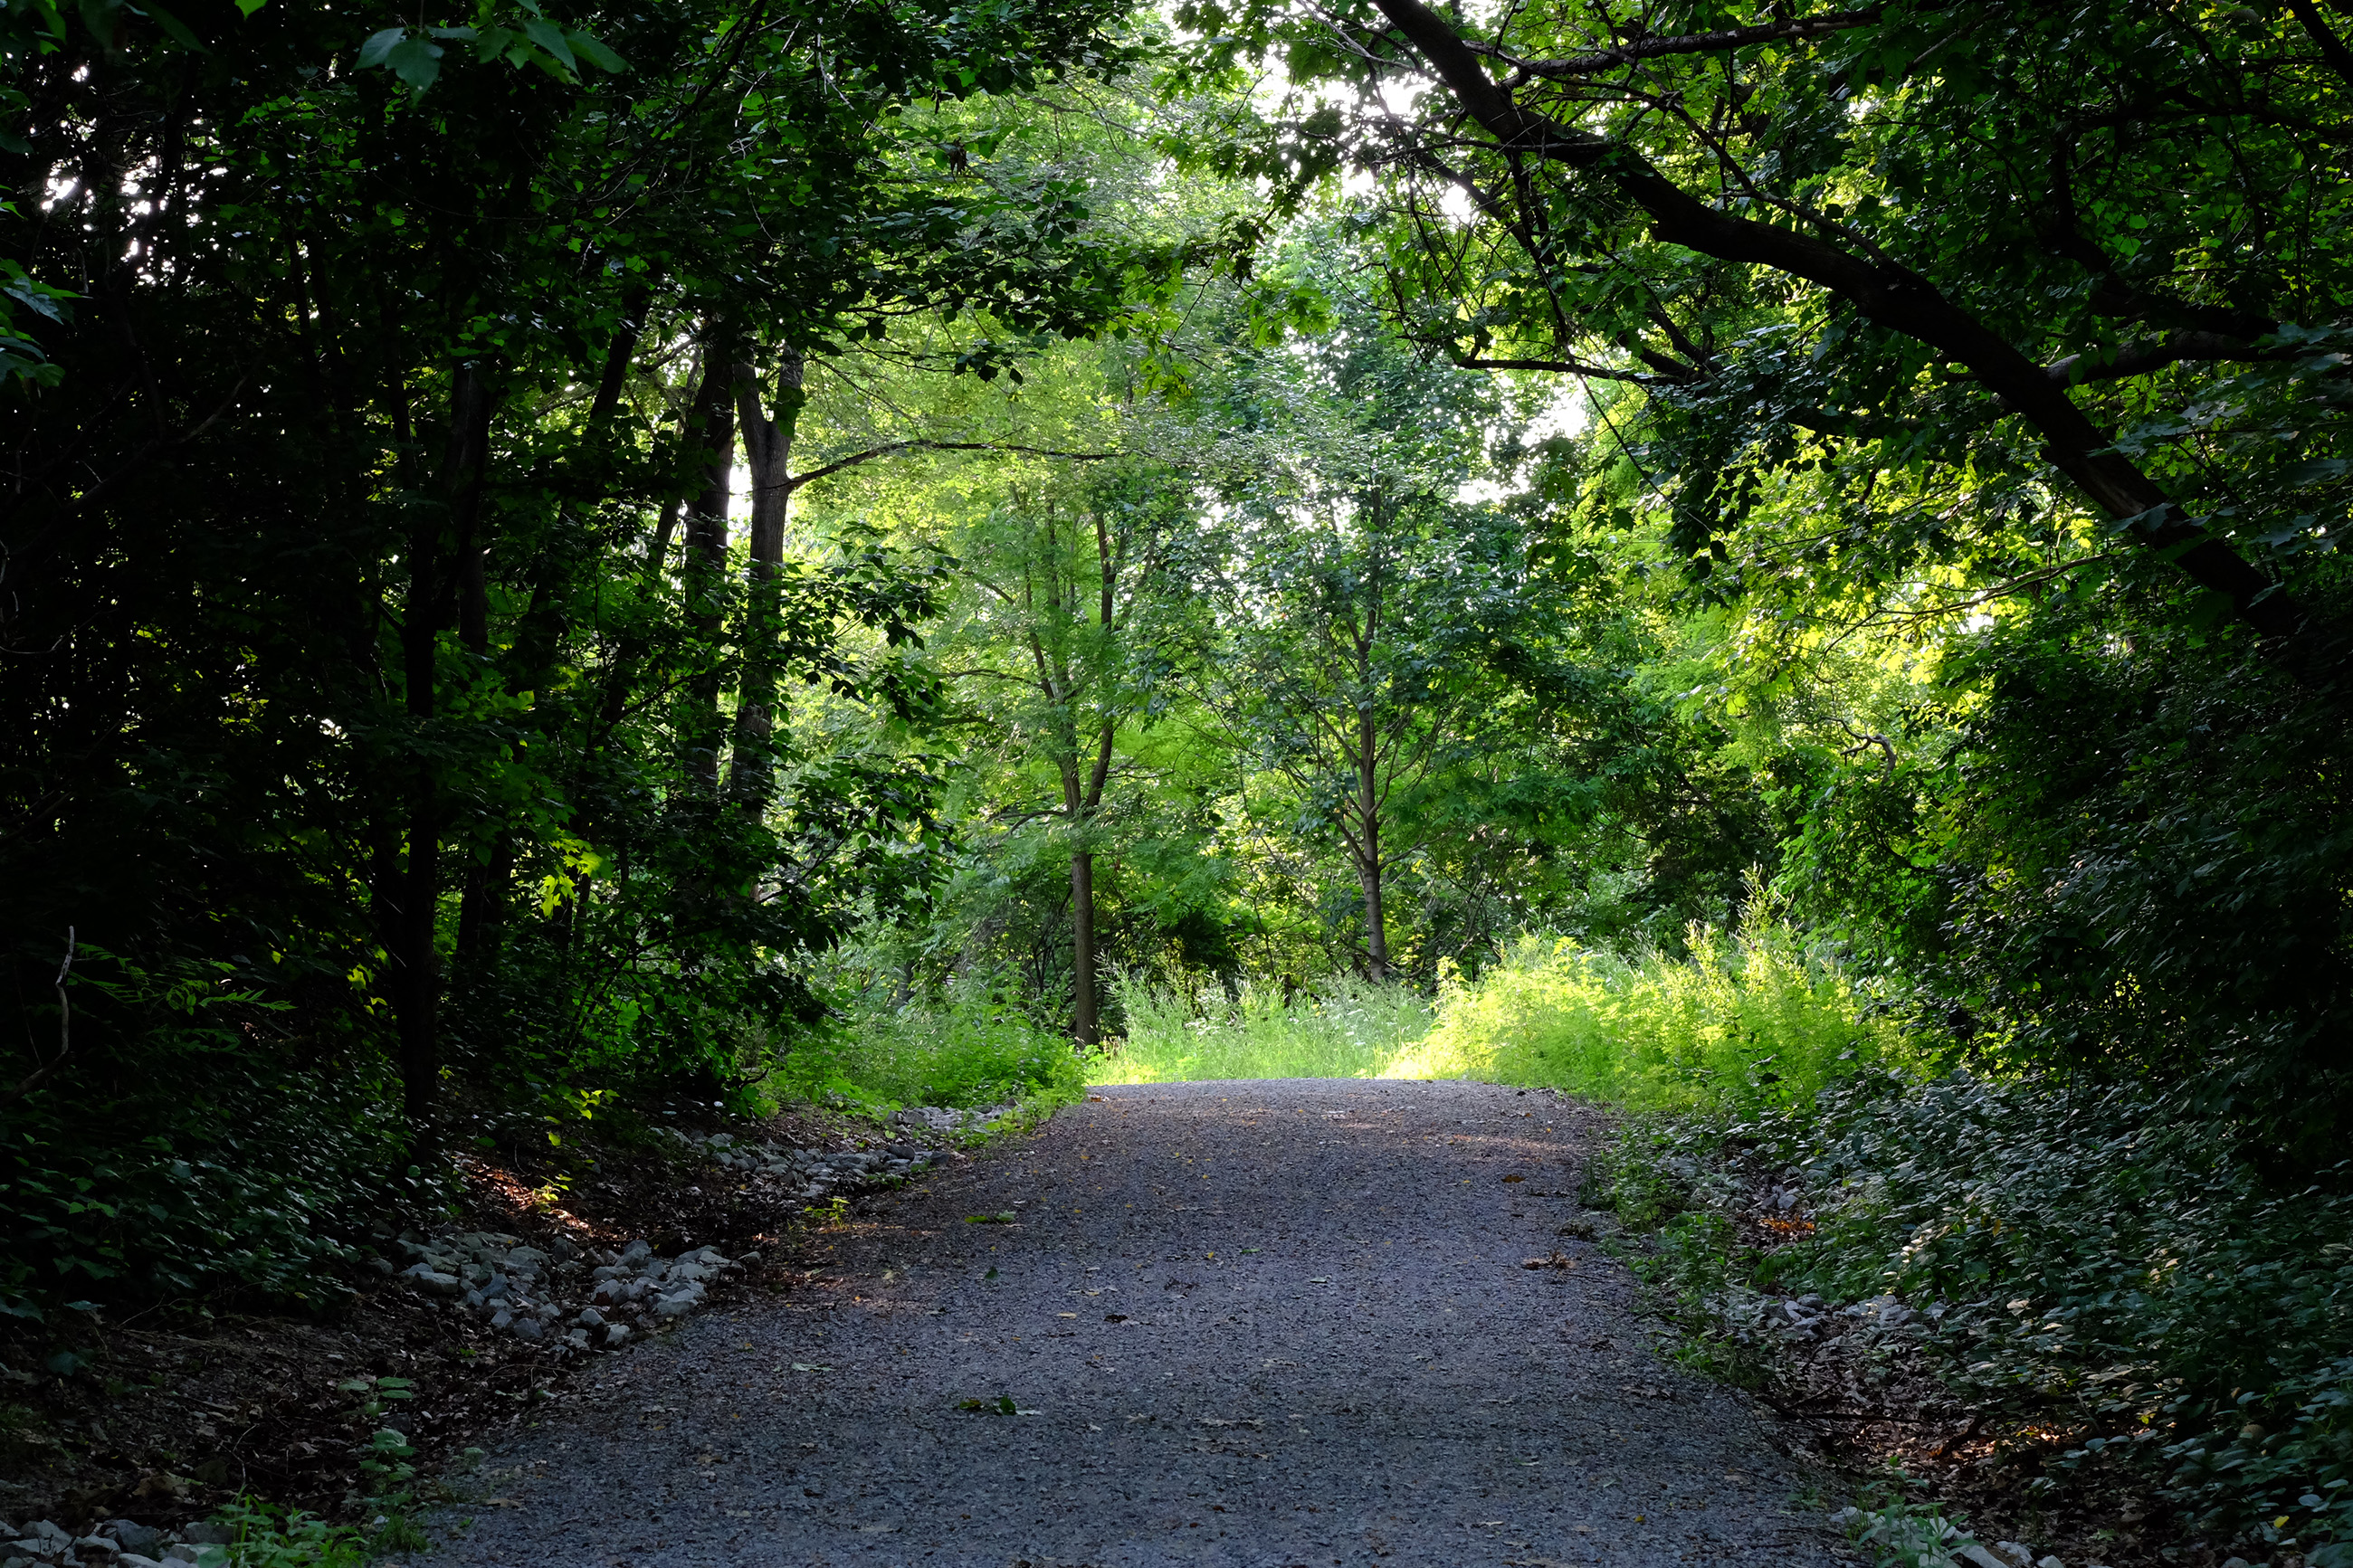 Trail in Sun Valley near Crothers Woods